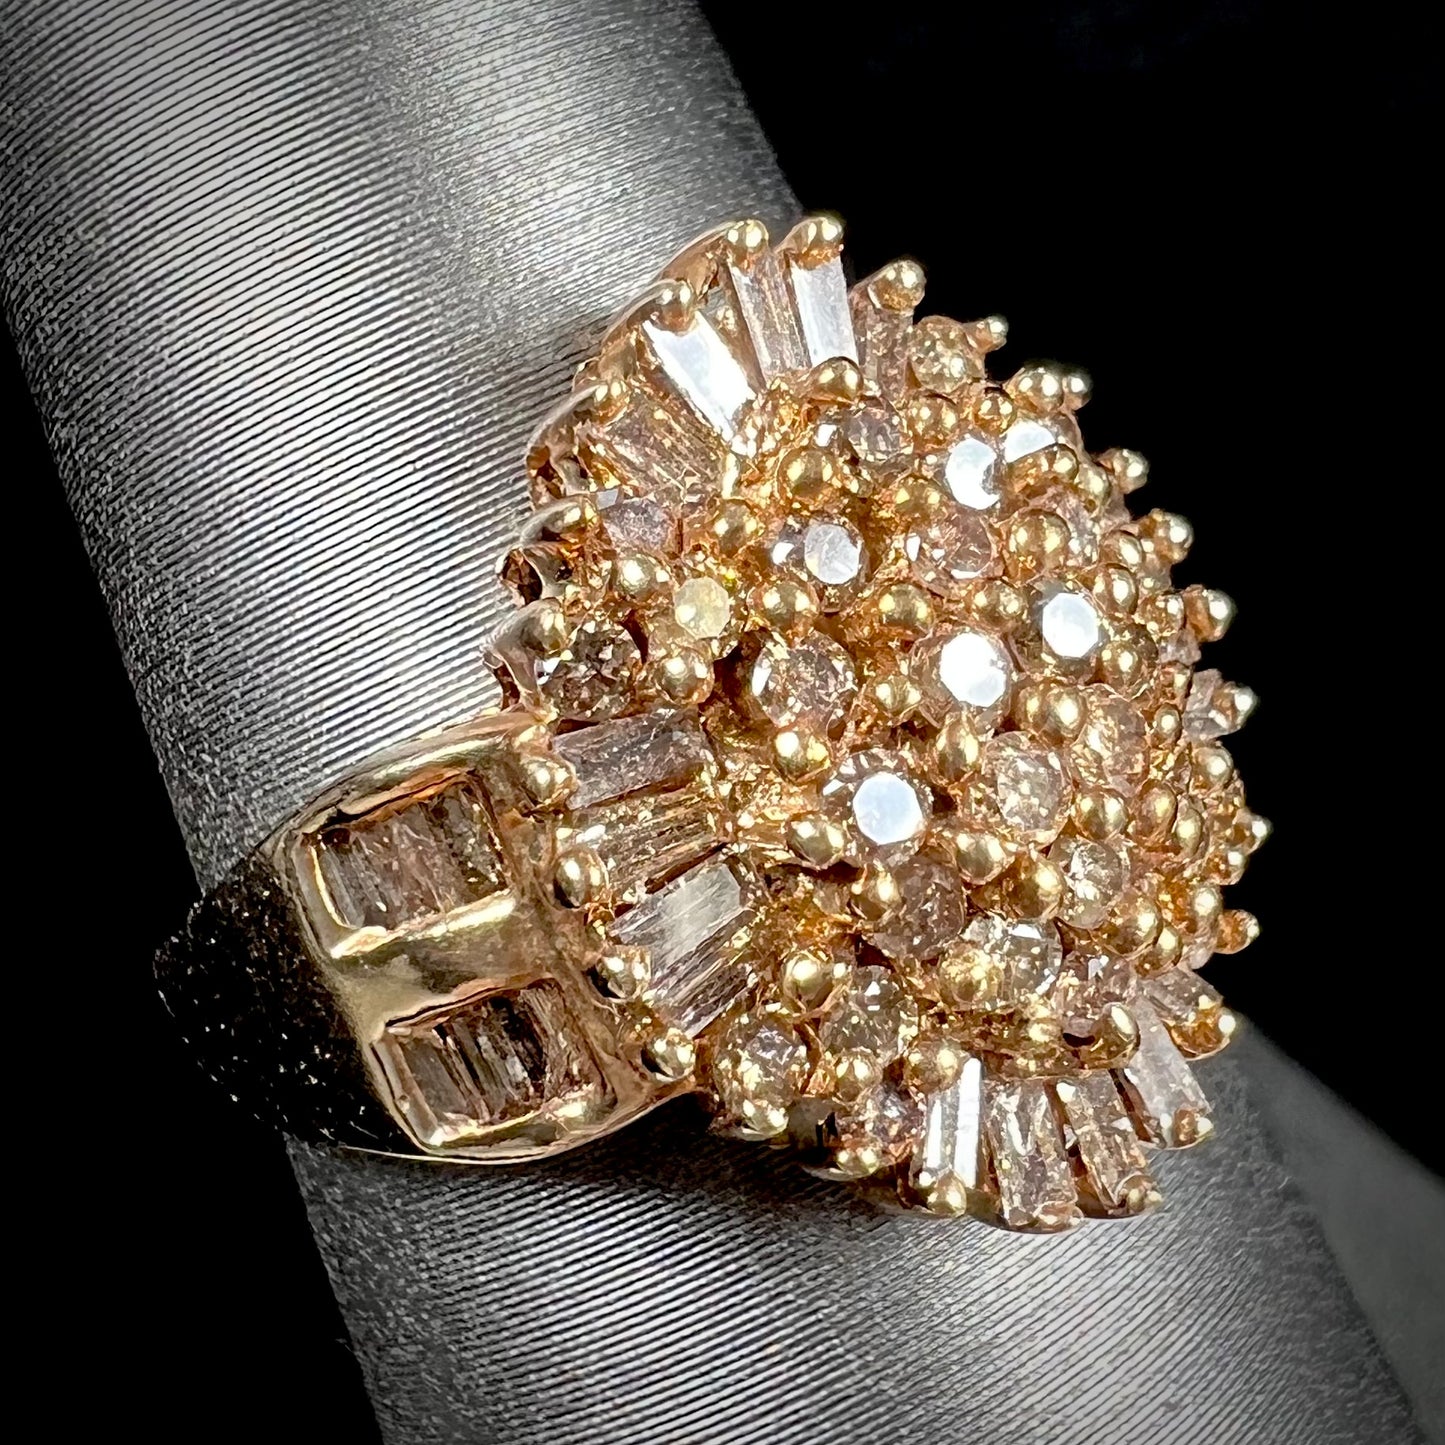 A ladies' cluster ring set with round and baguette cut cognac brown diamonds.